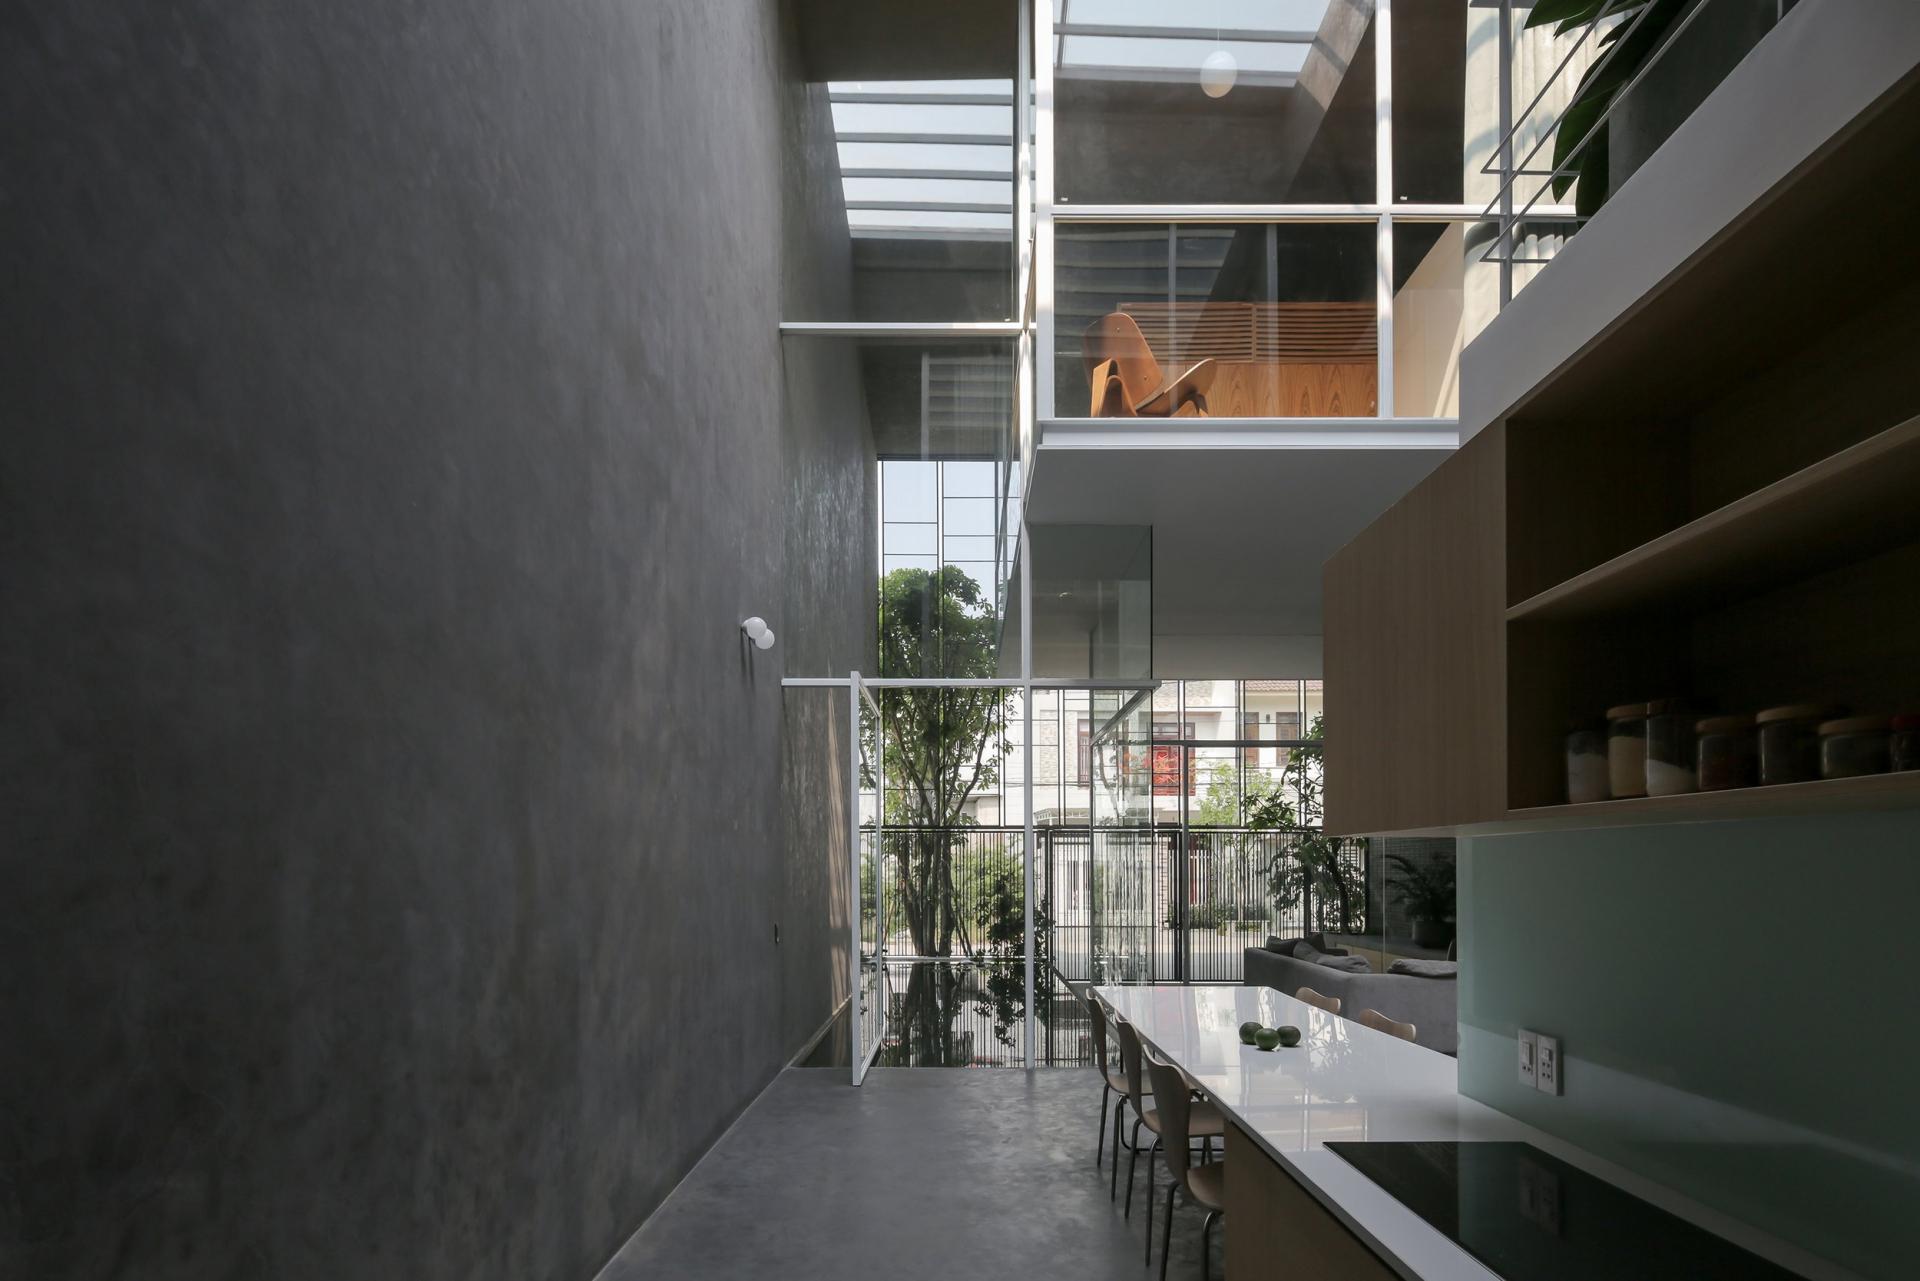 This Cubic House in Vietnam is Designed to Help Beat Harsh Monsoon and Warm Climate